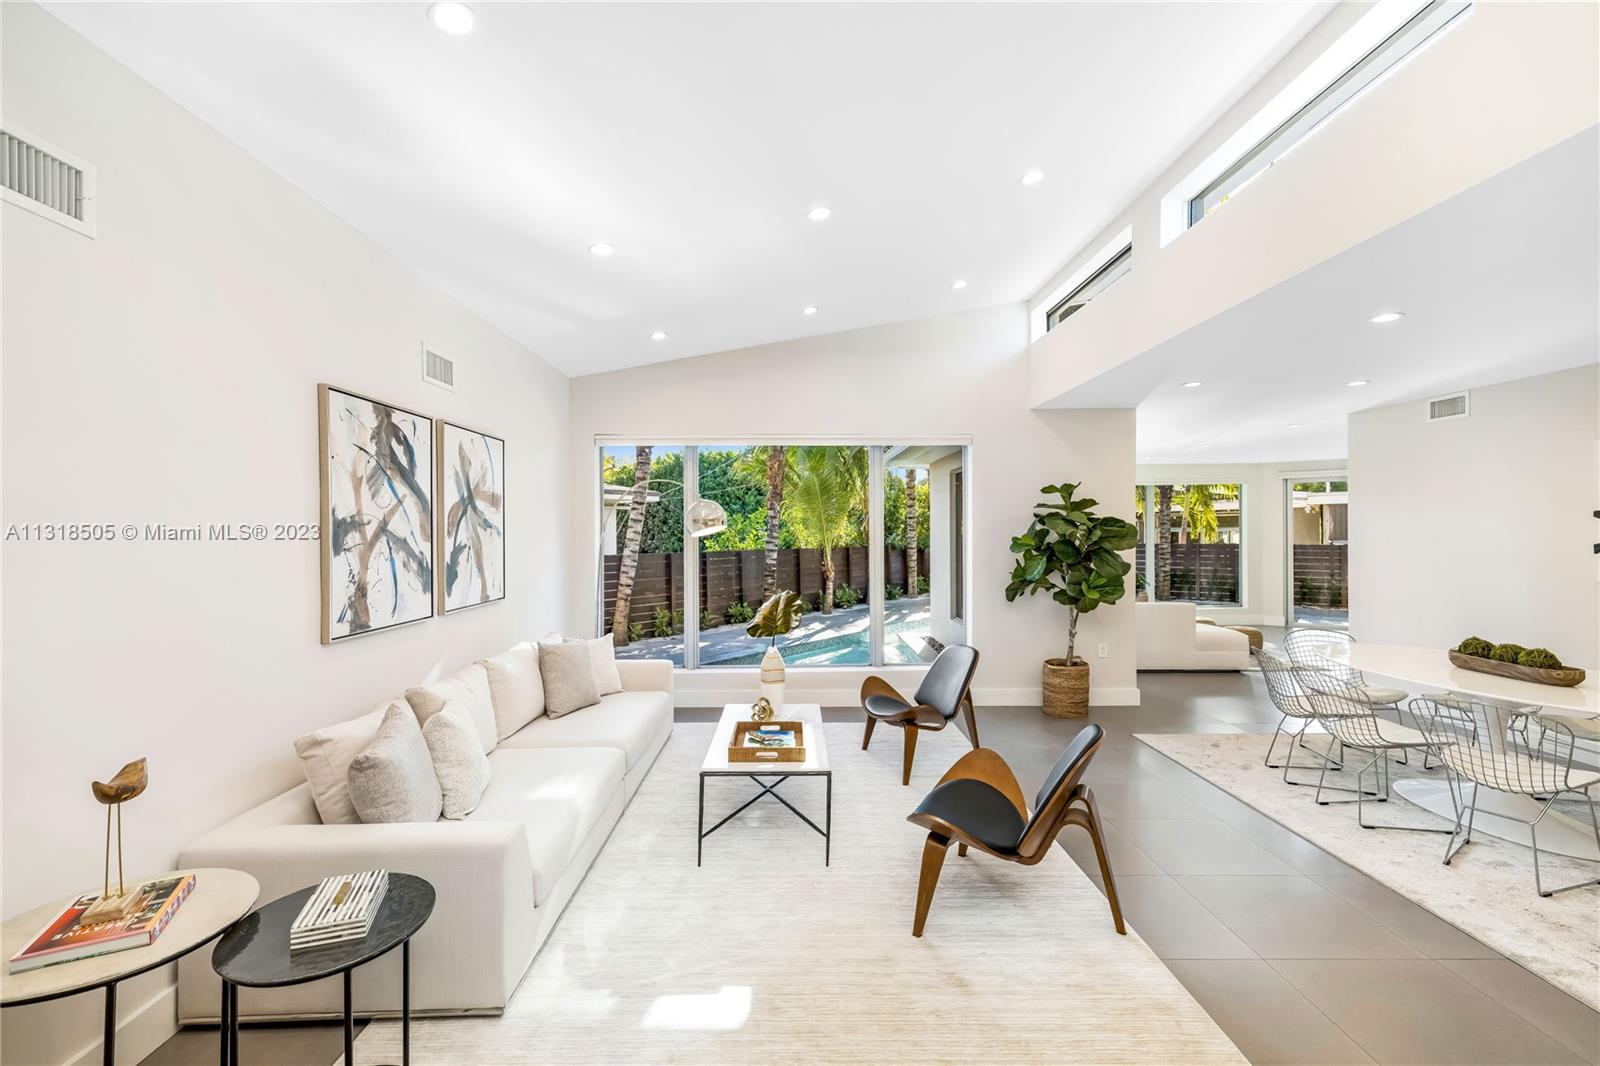 Come and live in the most sought after gated community of Miami Beach.Stunning and unique home with 5 Bedrooms, 4 Bathrooms, 1 Powder Room  with over 3,100 SF home, that was completely renovated! Enjoy 15’ vaulted ceilings, impact windows & doors, an open kitchen and walk-in pantry, 9 ft island, quartz countertops, formal living area, casual family room & views of the unique wrap-around heated pool & deck. Split floor plan w/ primary suite w/ sitting room (easily converted into an office), large walk-in closet, expansive master bathroom w/ separate lux tub & shower. Continuous porcelain tile throughout. This home offers an ideal lifestyle for family and entertainment. Live in this guard-gated island of Normandy Shores Golf Club and enjoy golf, tennis & gorgeous views.